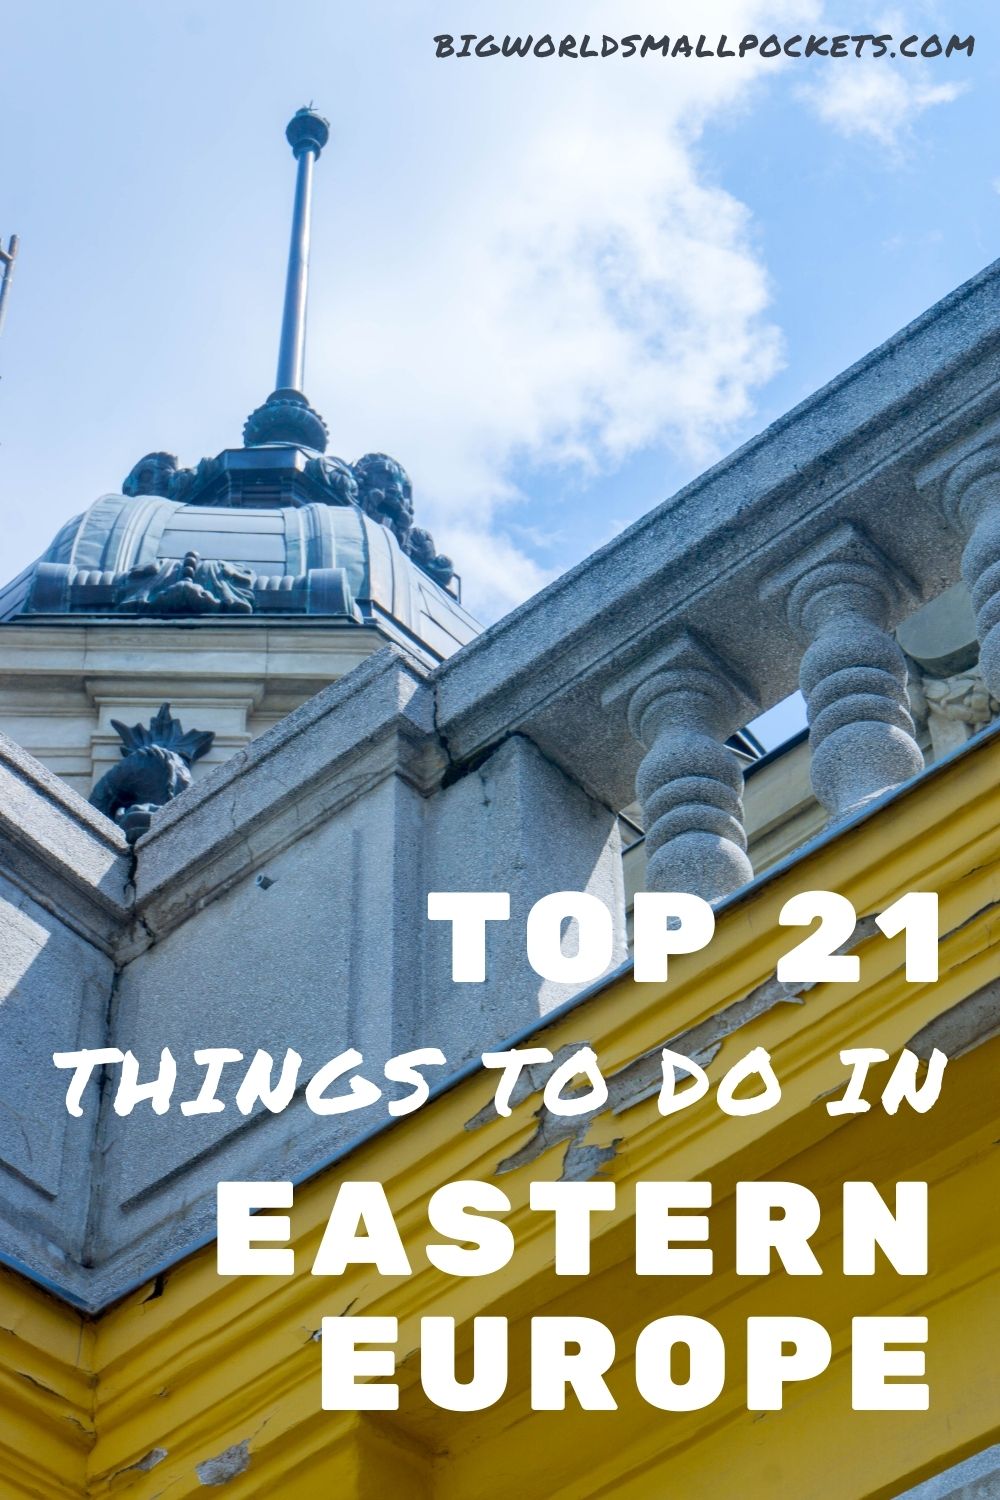 21 Best Things to Do in Eastern Europe